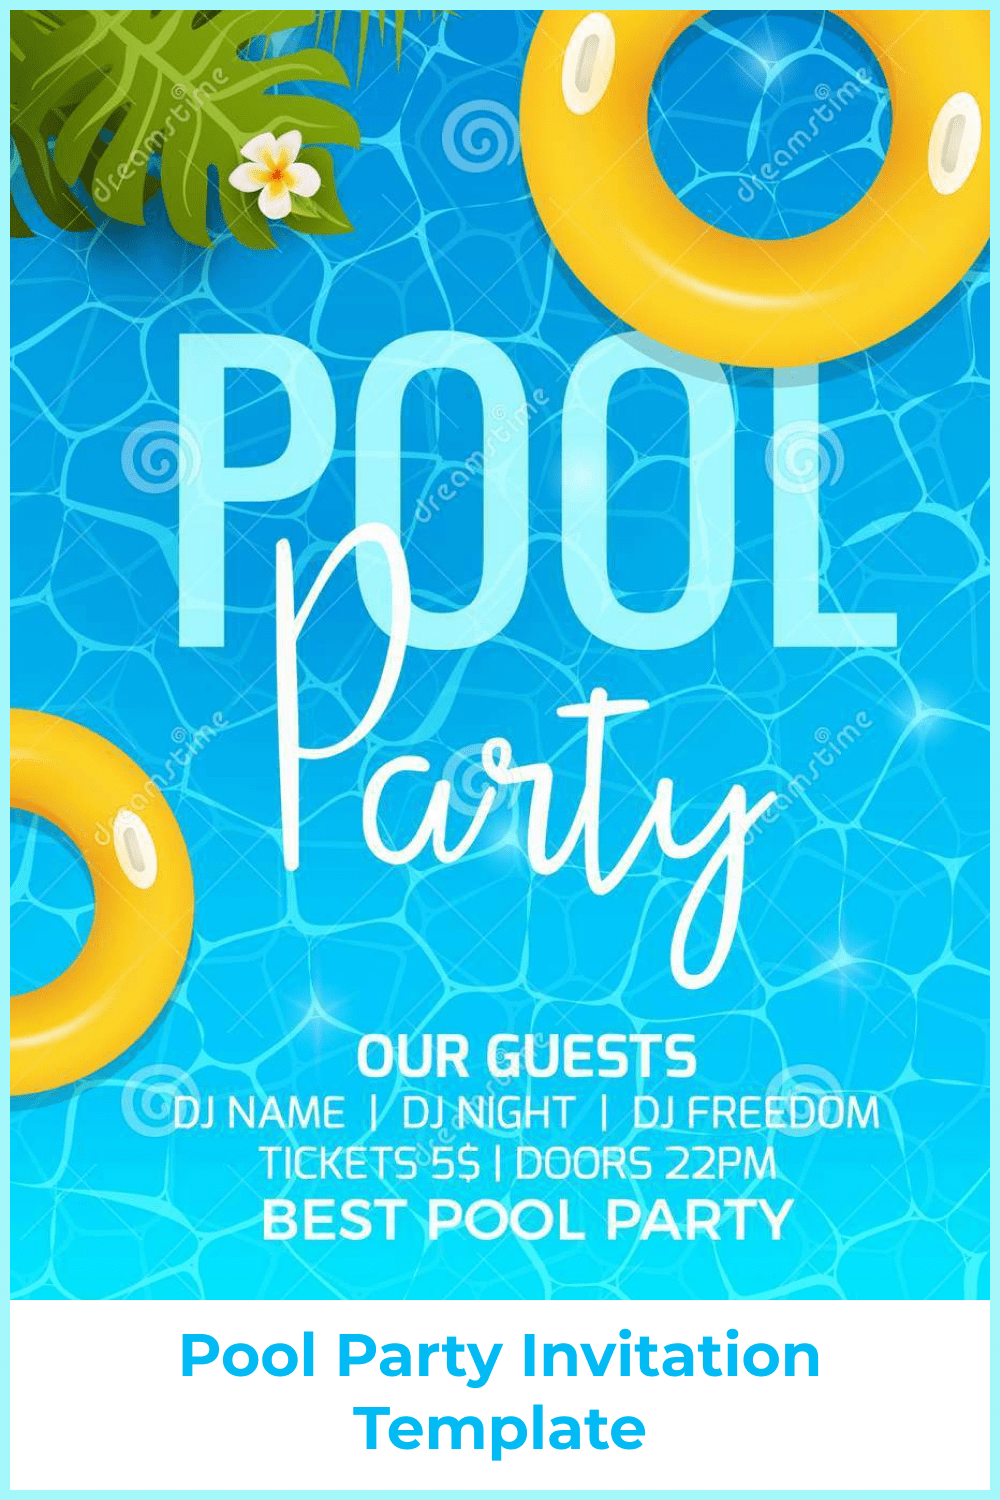 Oh this is an invitation for a fun and elite pool party.